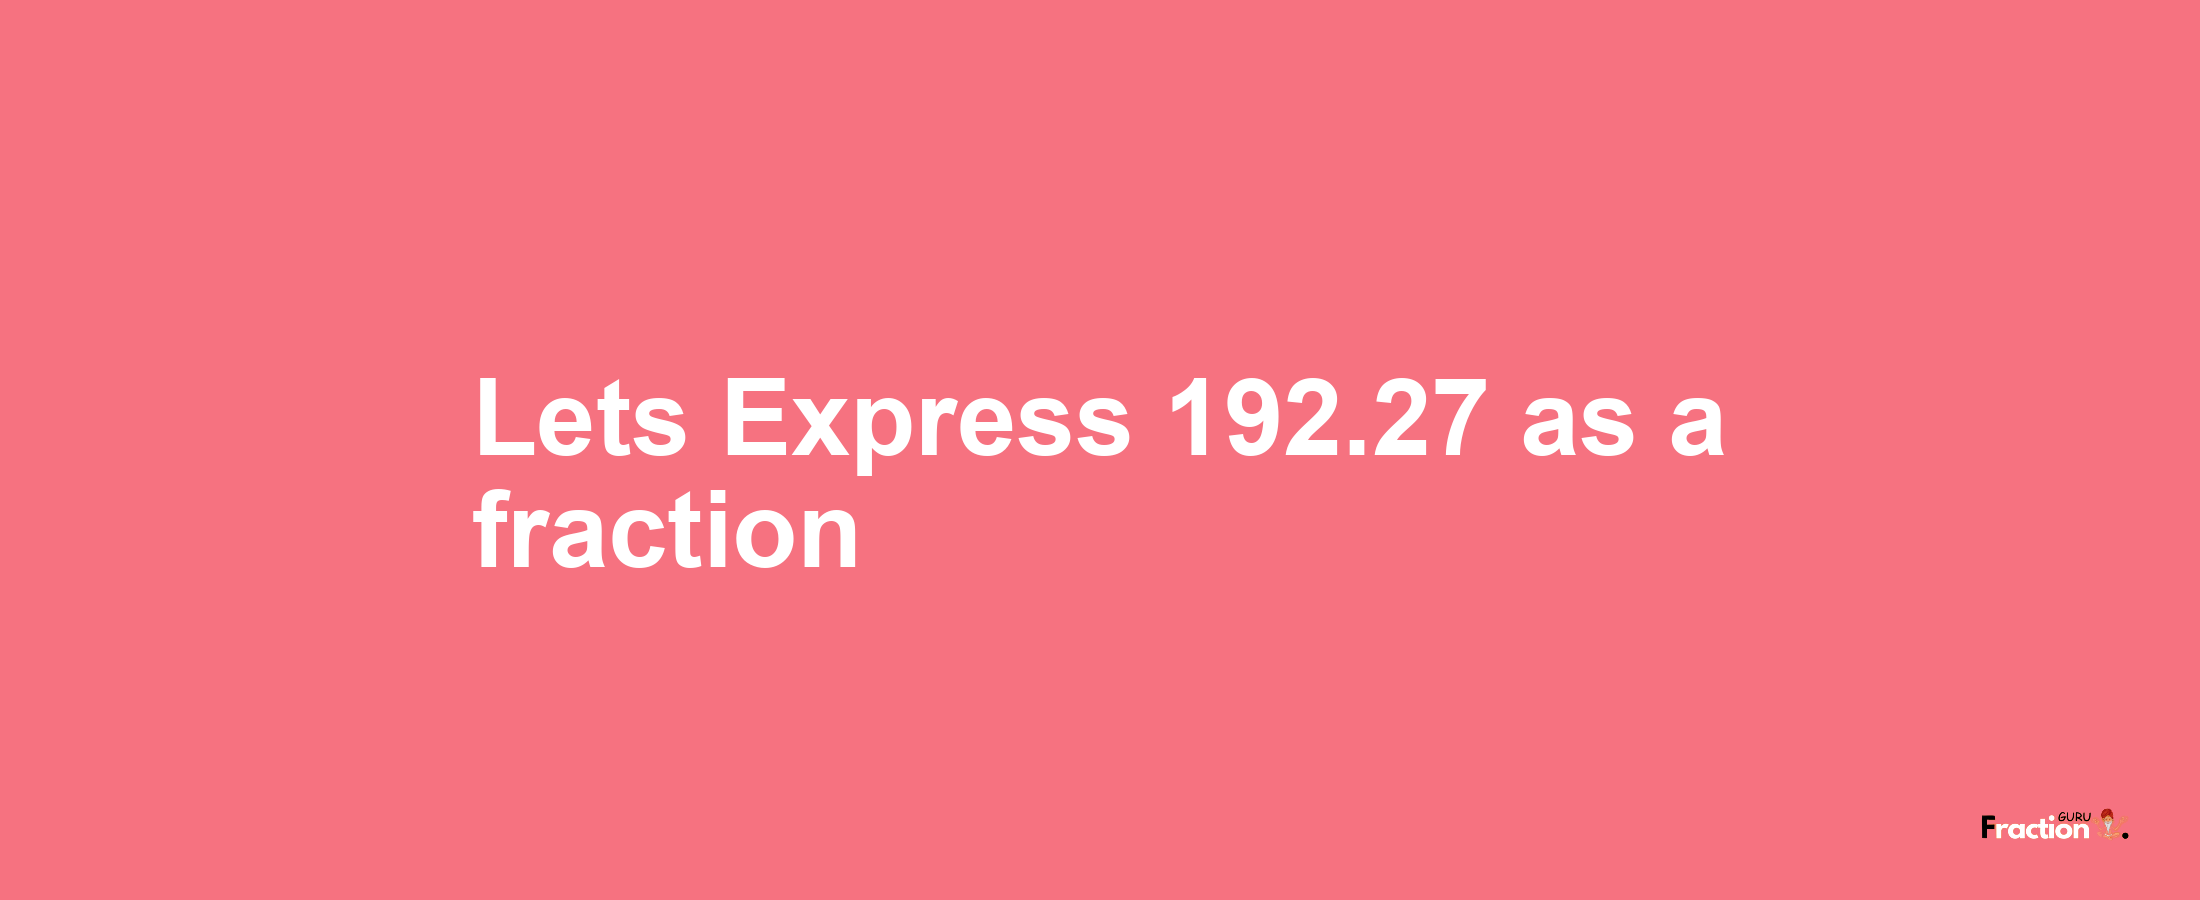 Lets Express 192.27 as afraction